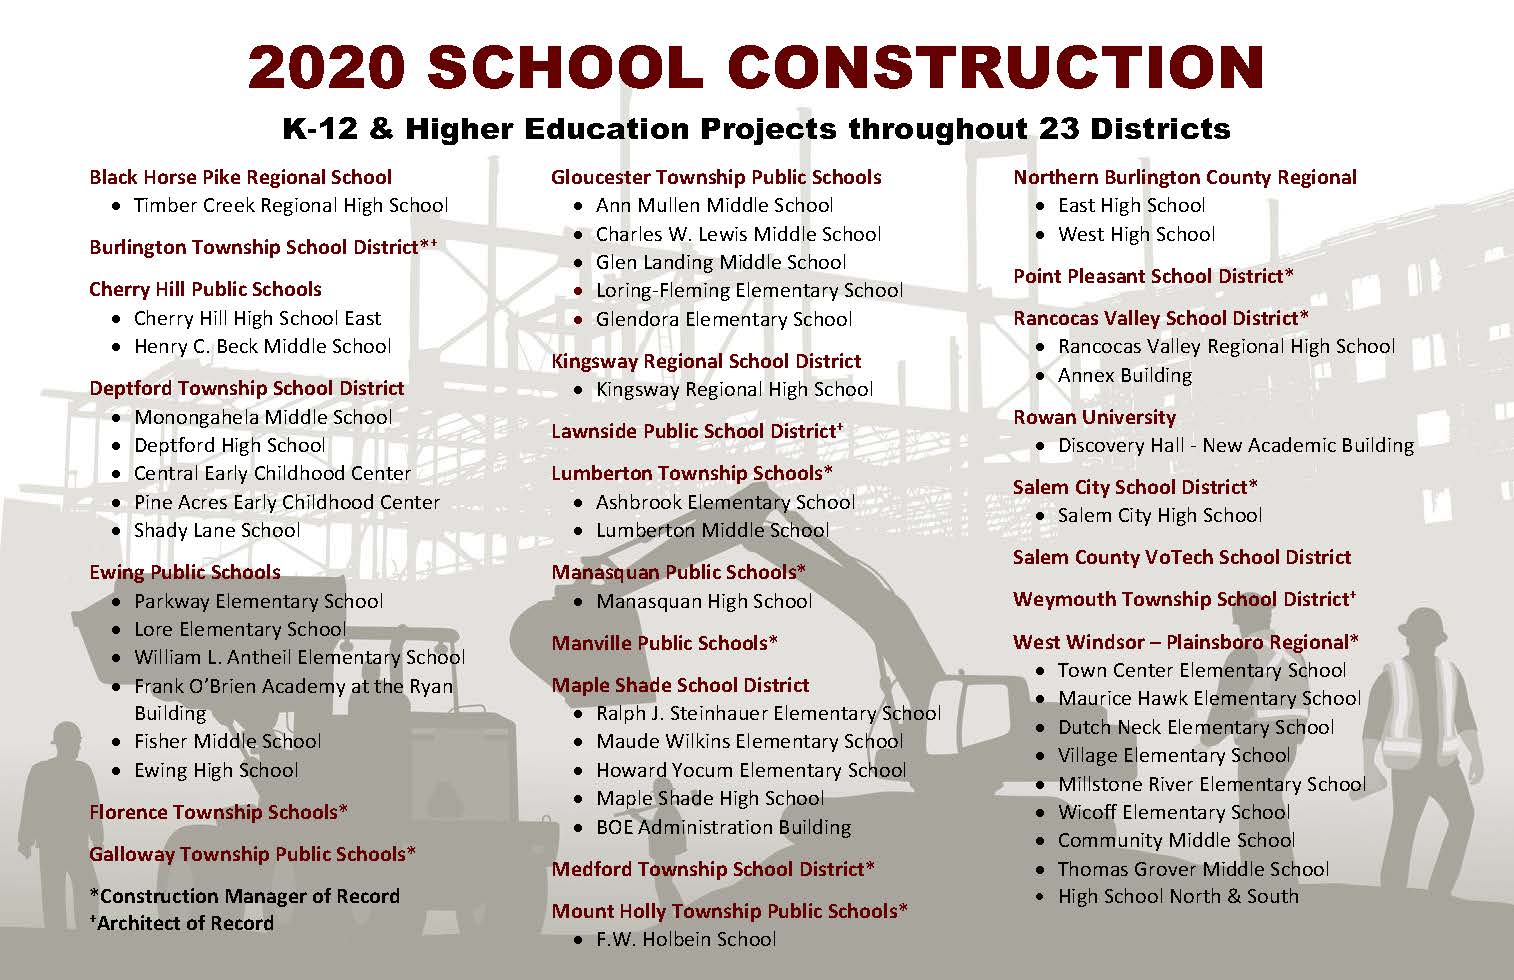 NEW ROAD's 2020 Construction Management work including K-12 & Higher Education